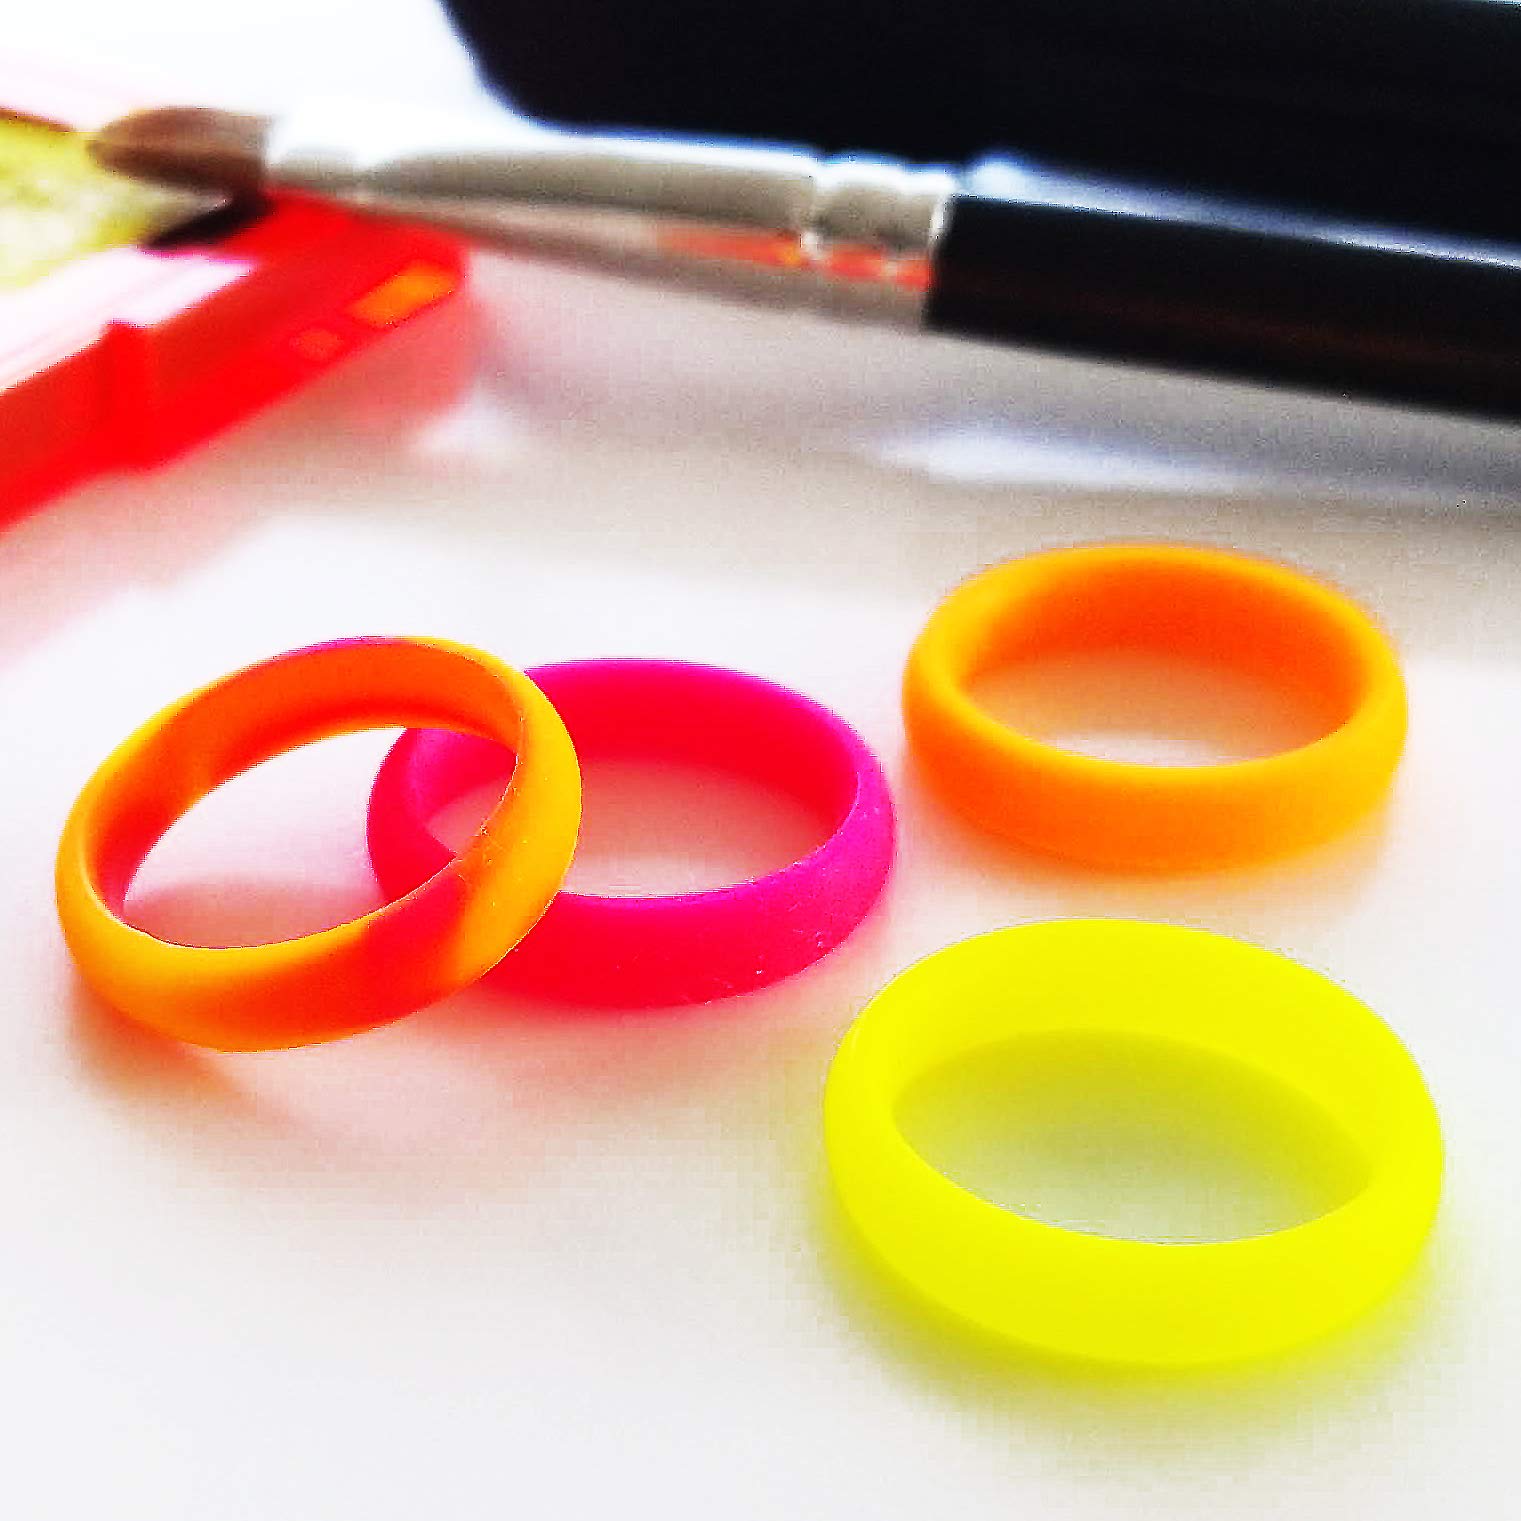 Knot Theory Silicone Rings for Women Rainbow Neon Pink Yellow Orange – Bright Camo Rubber Wedding Band – Gym Workout Yoga Pilates Ring for Her